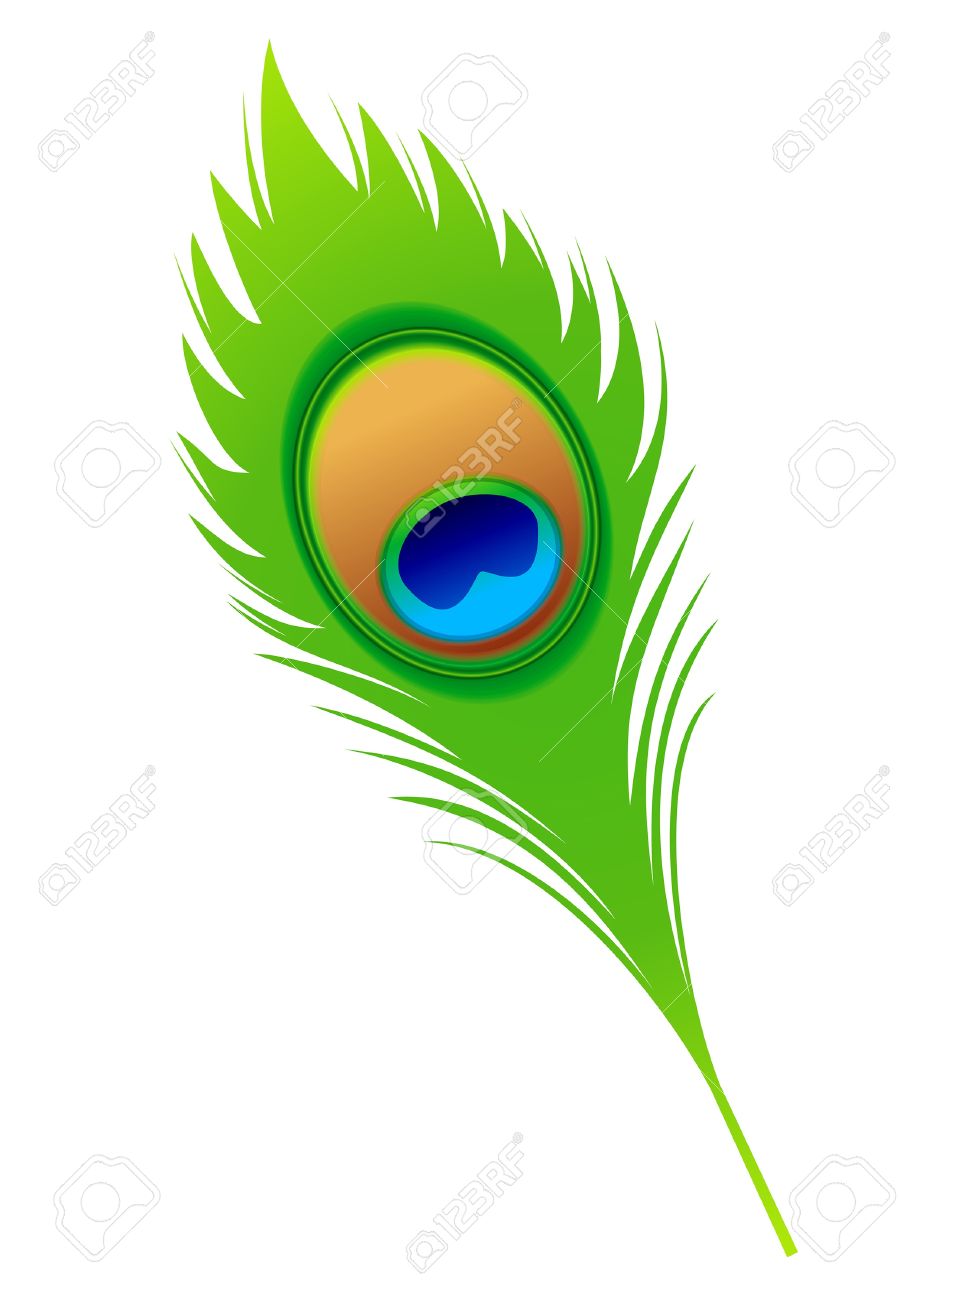 Peacock feather clipart.